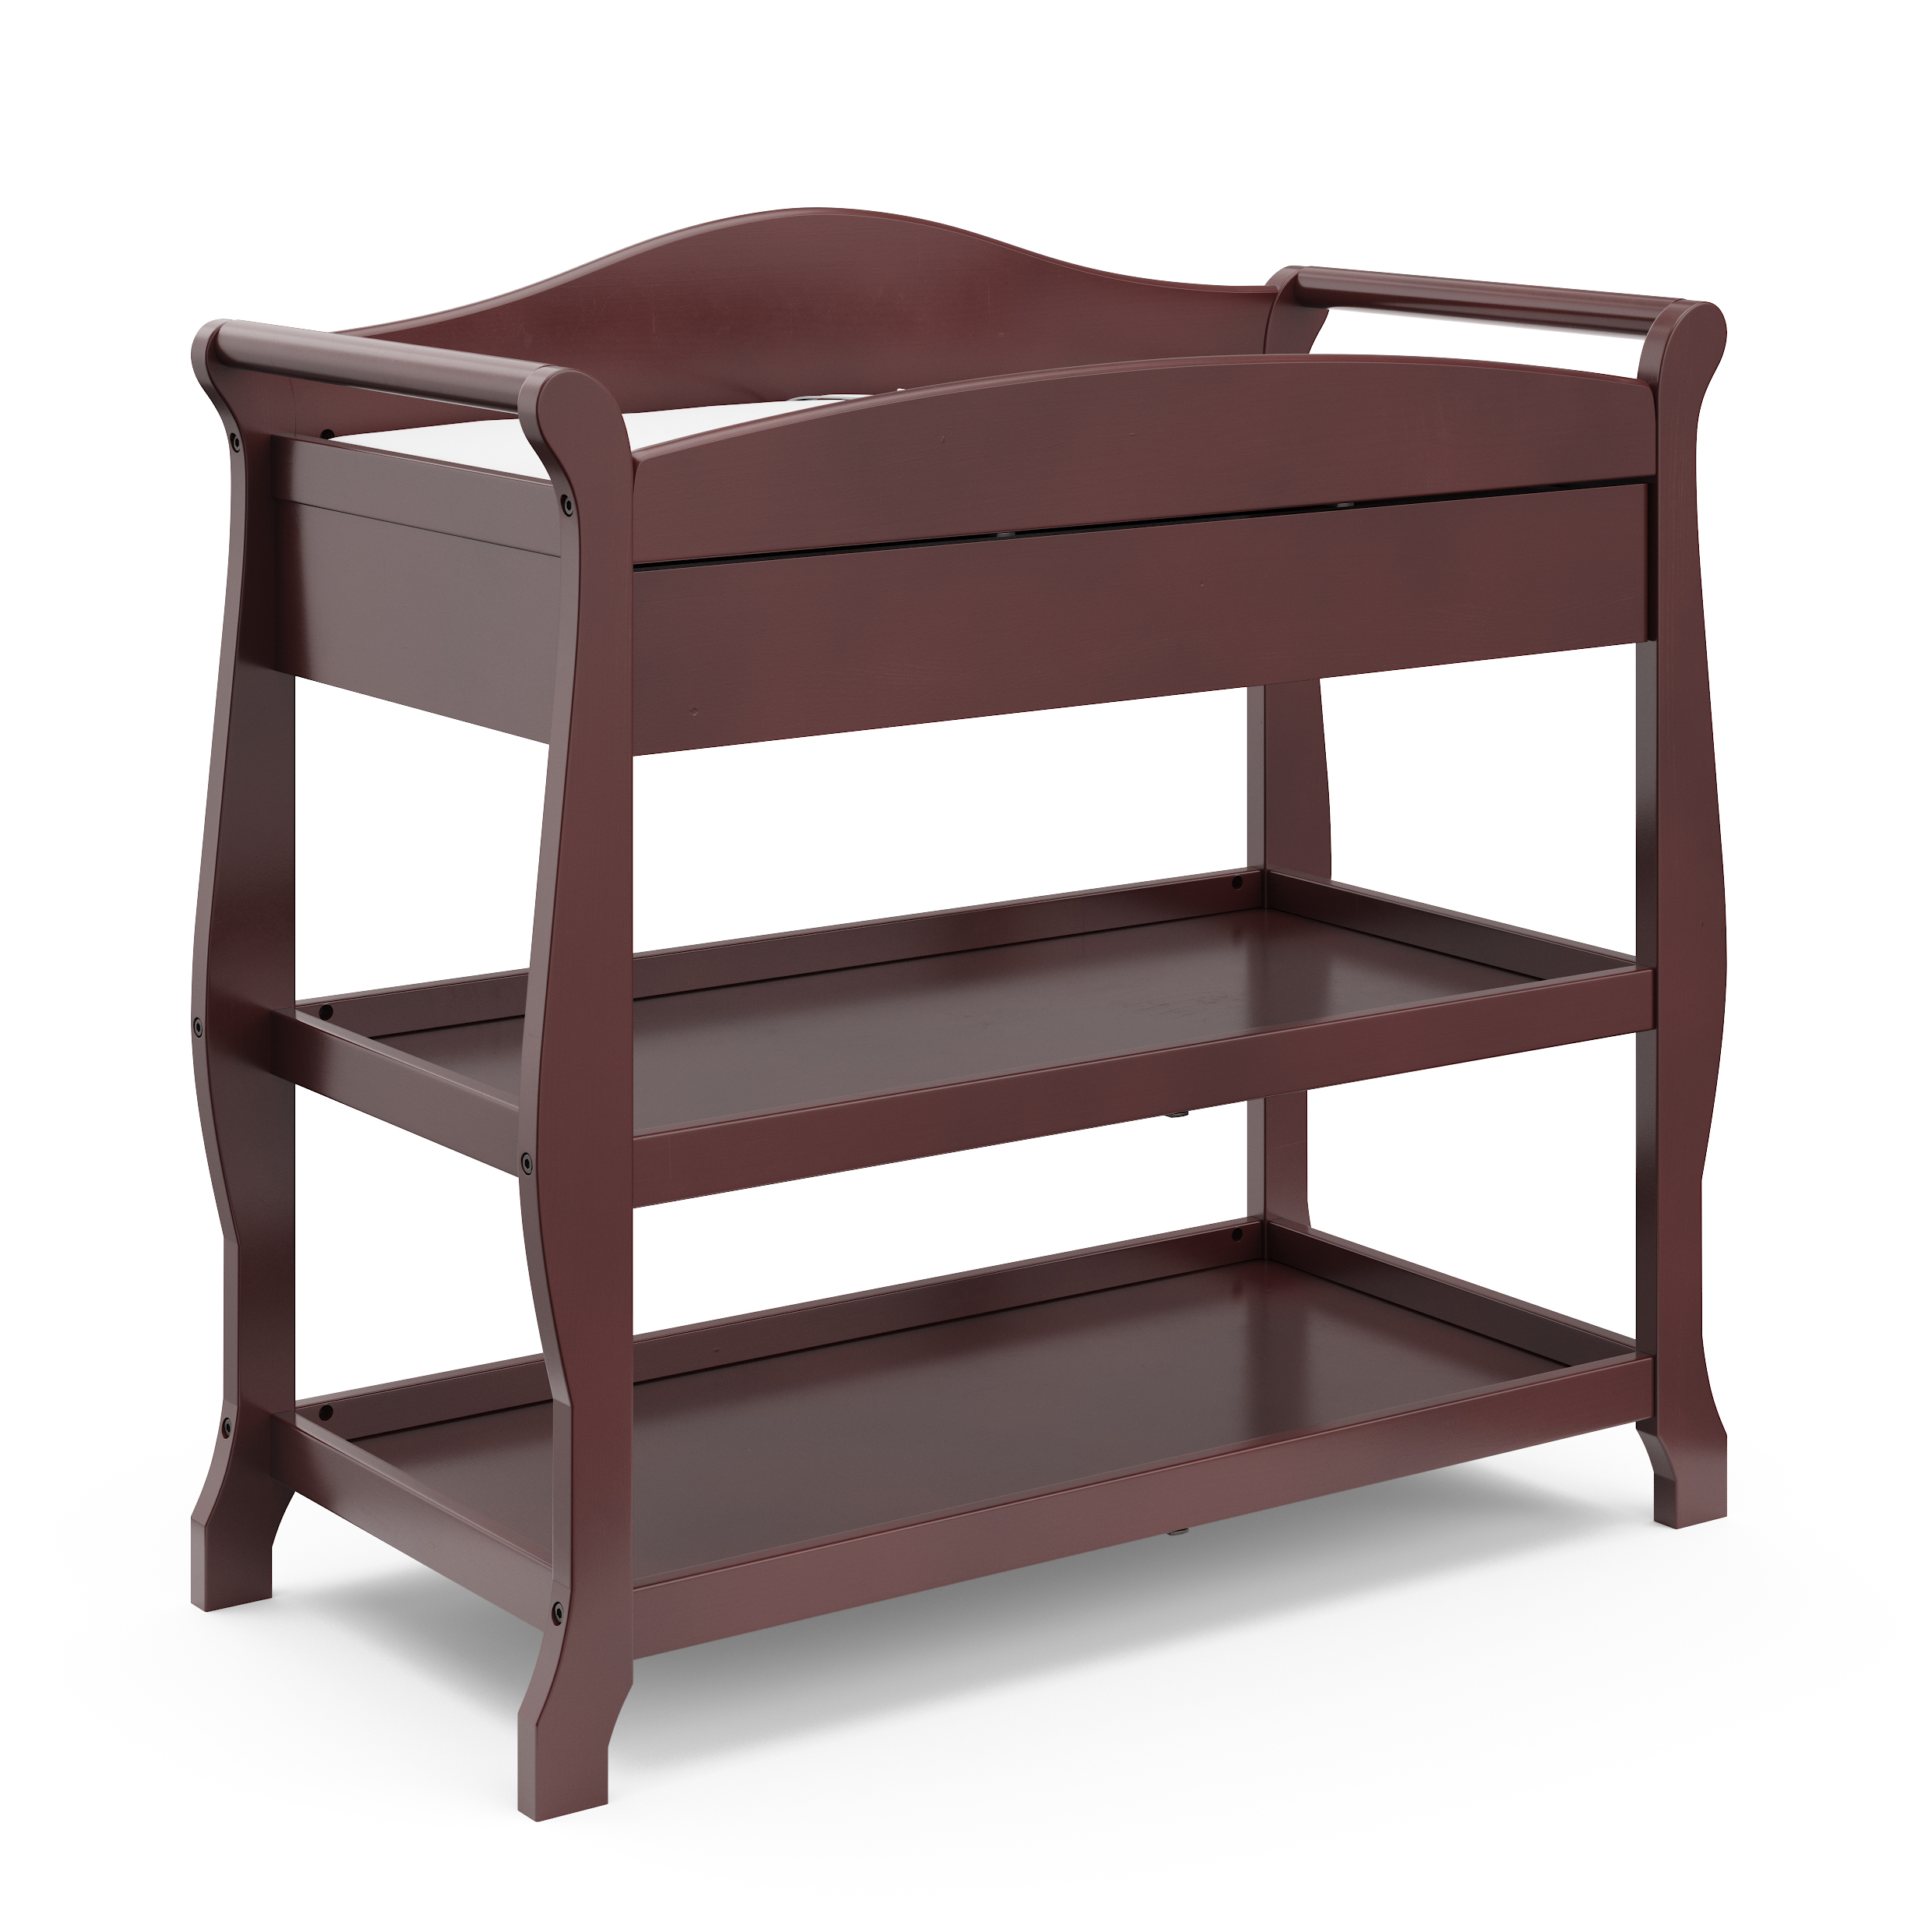 Storkcraft Aspen Changing Table with Drawer Cherry - image 3 of 9